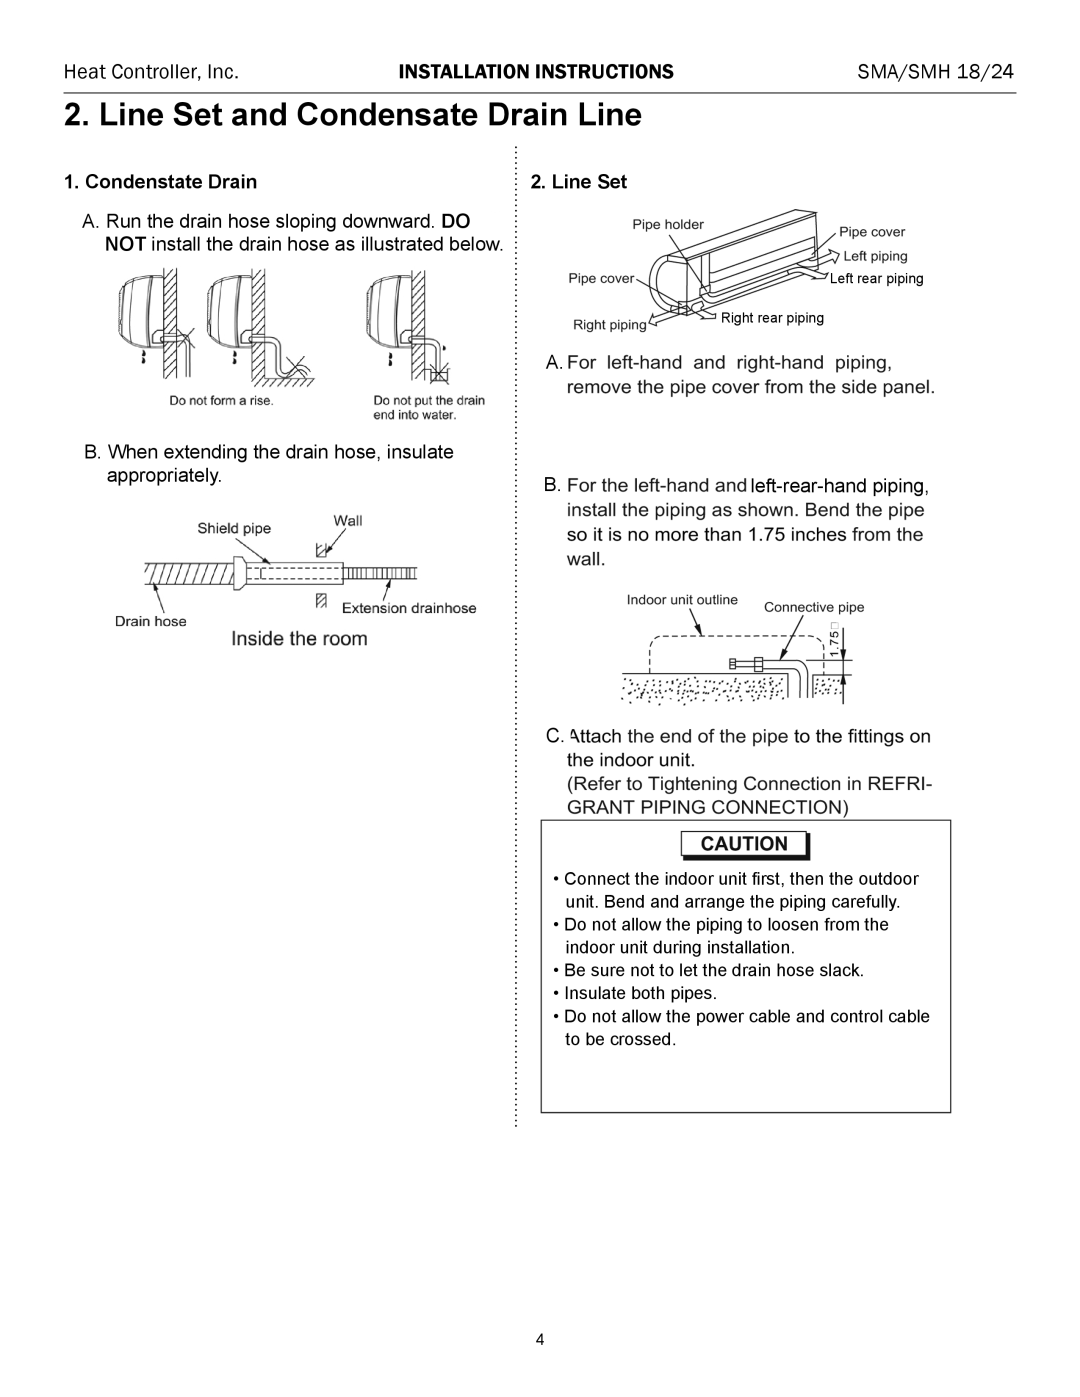 Heat Controller SMA/SMH 18/24 Line Set and Condensate Drain Line, Heat Controller, Inc, Installation Instructions 